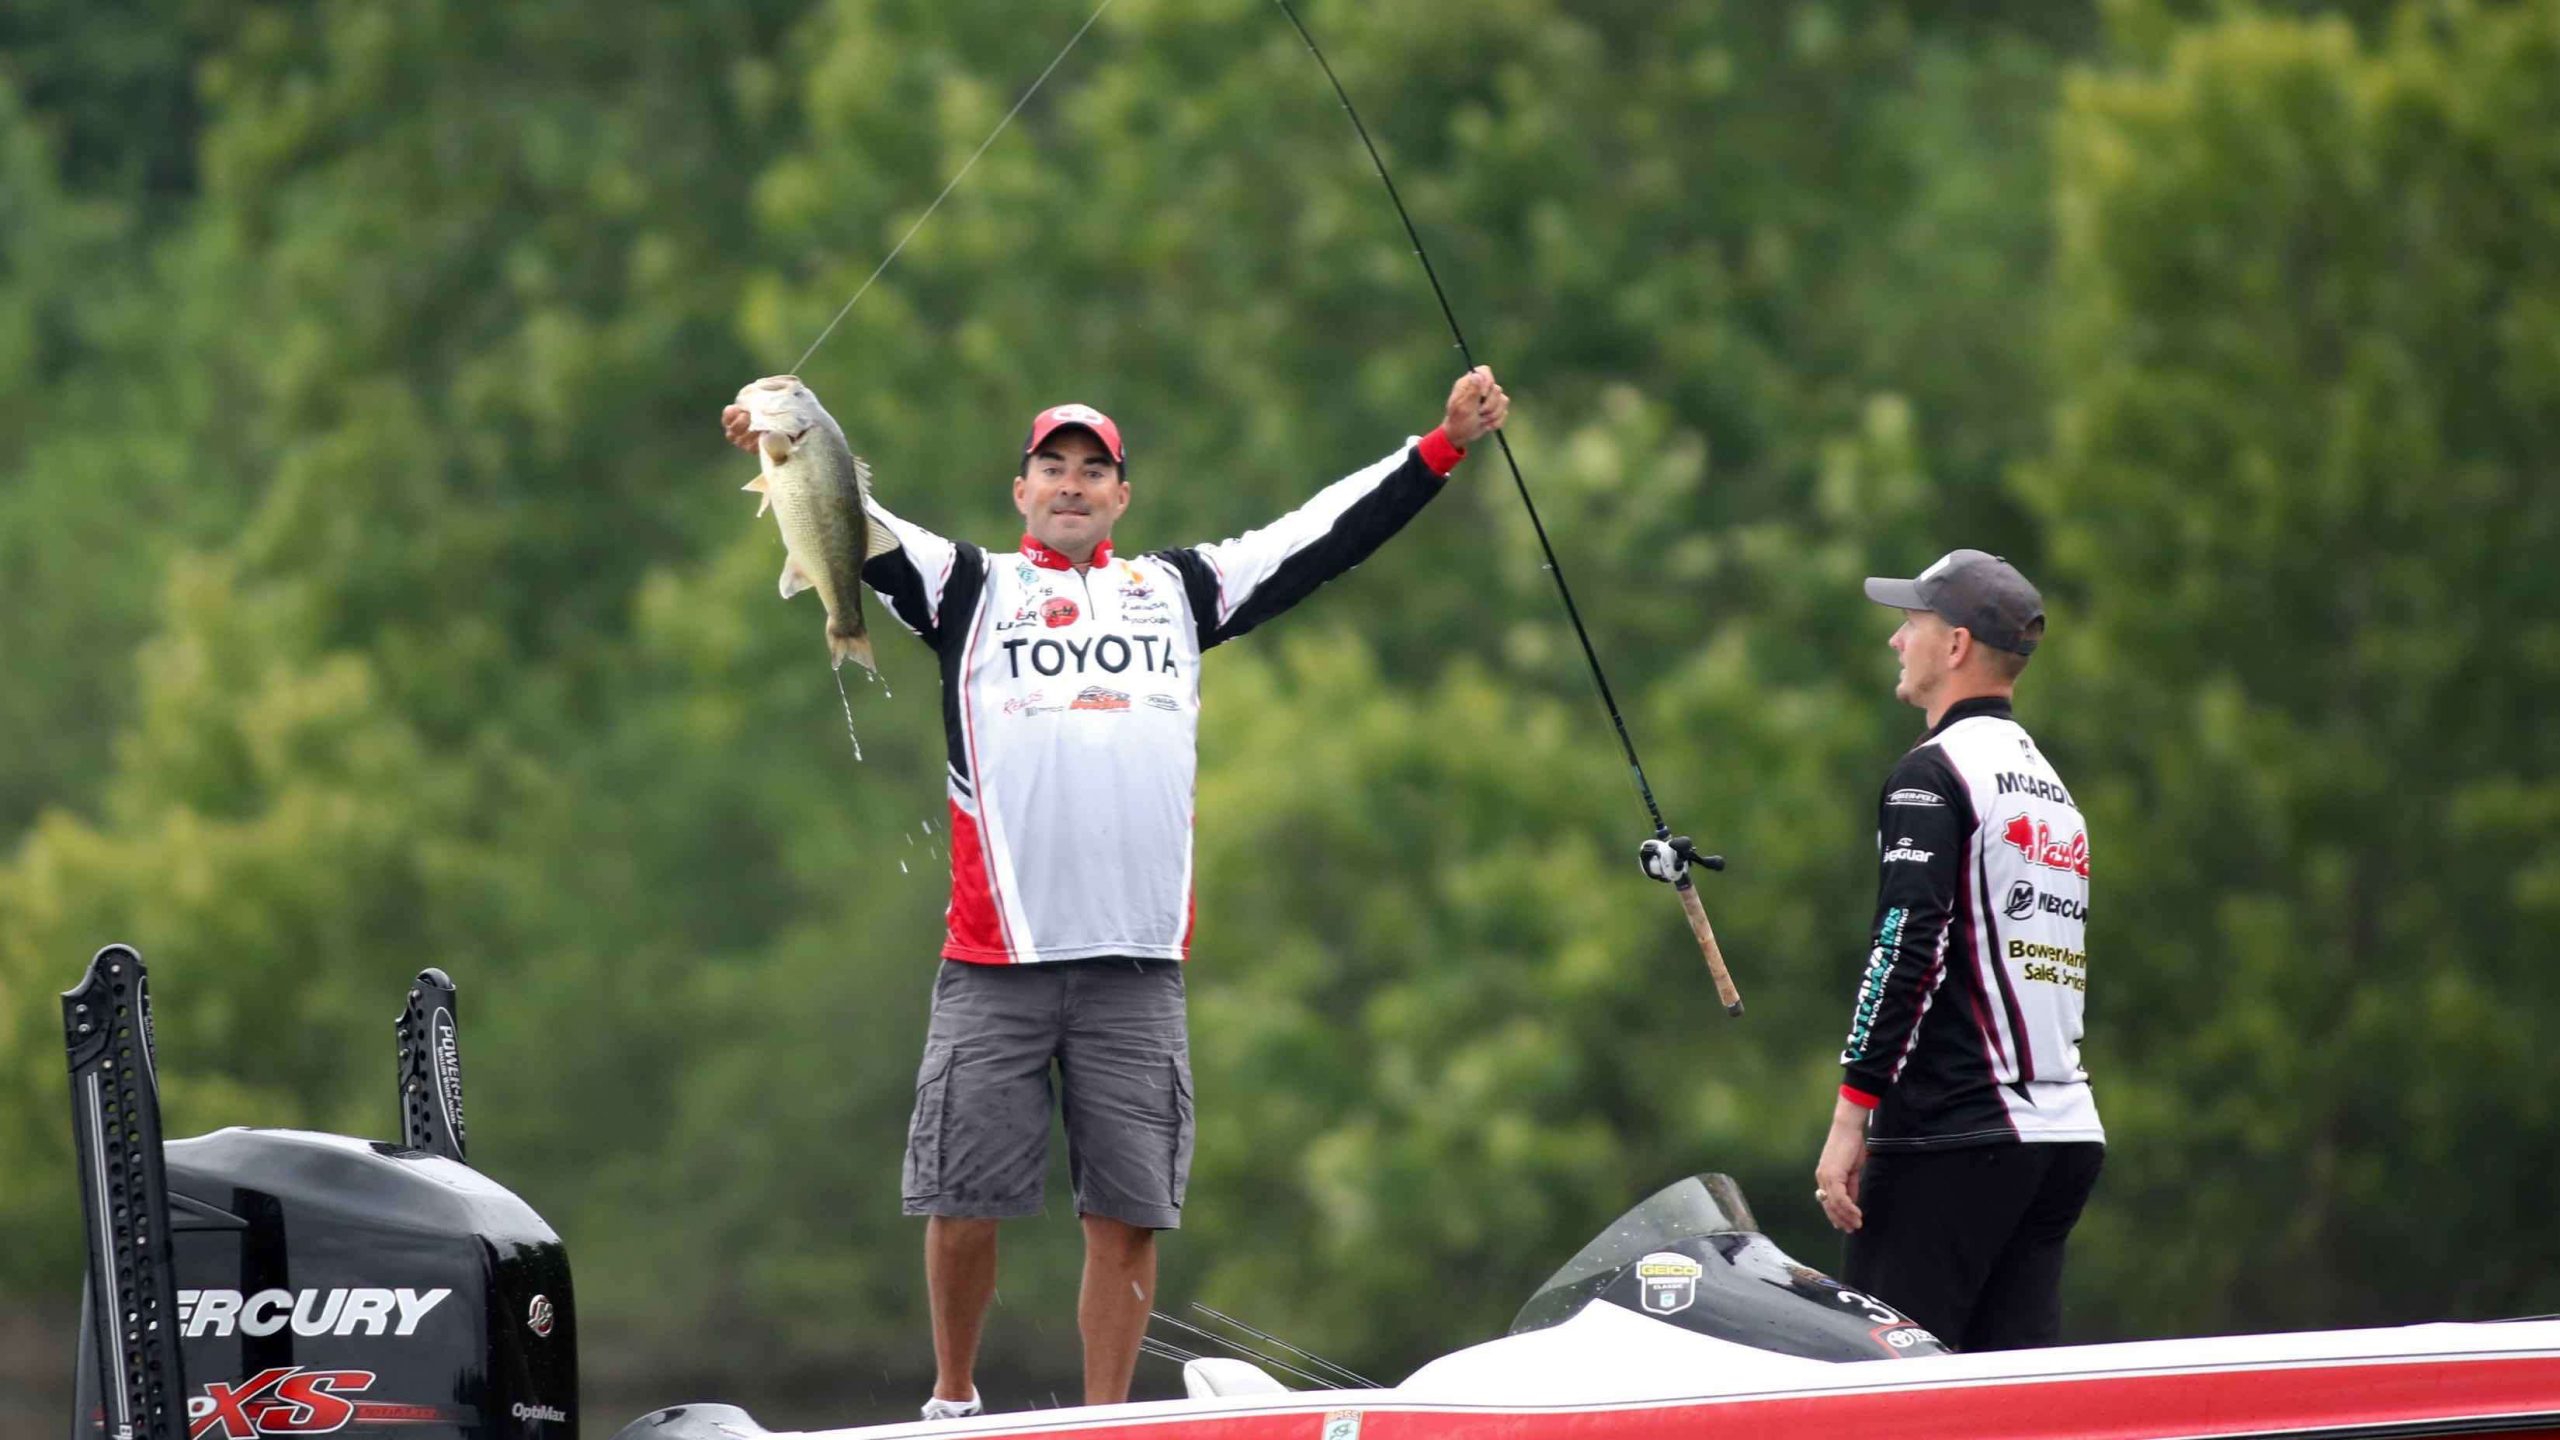 Teb Jones strikes a triumphant pose with a 4-pounds-plus fish to start Day 3 as co-angler Matthew Mcardle looks on.
